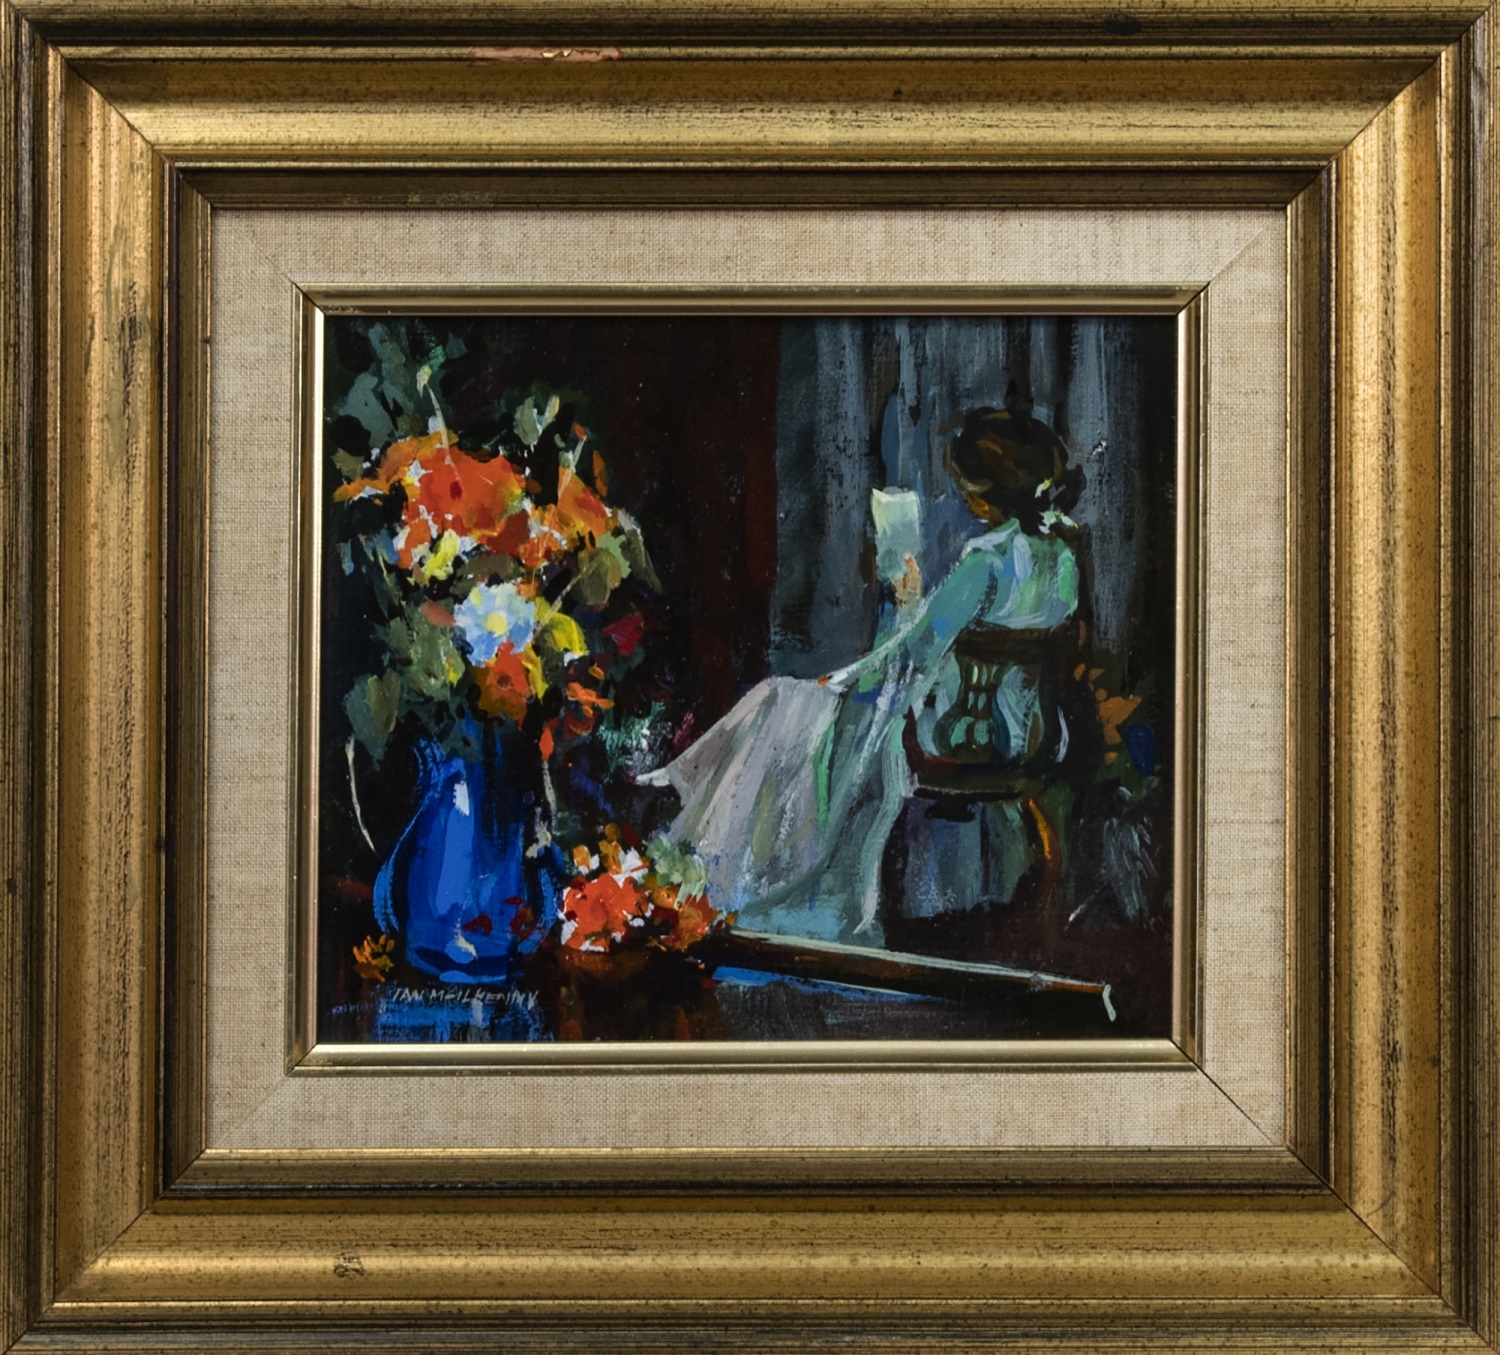 STILL LIFE WITH WOMAN, AN OIL BY IAN MCILHENNY